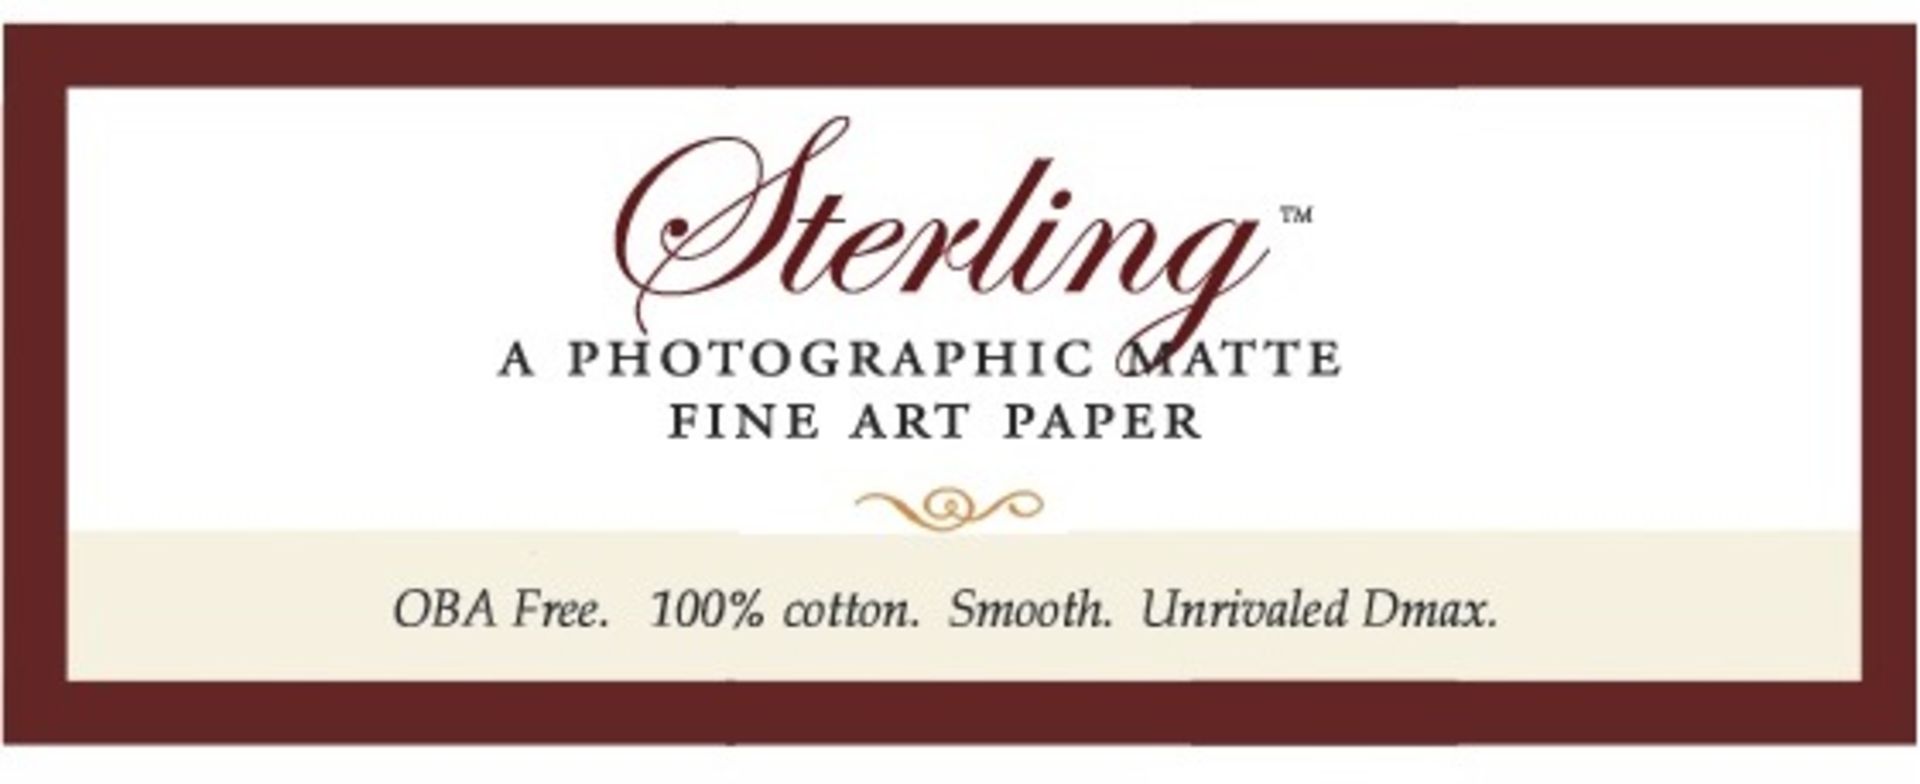 1 x Roll of Breathing Colour STERLING Photographic Matte Fine Art Paper - Size 24" x 50' - 250gsm - - Image 4 of 5